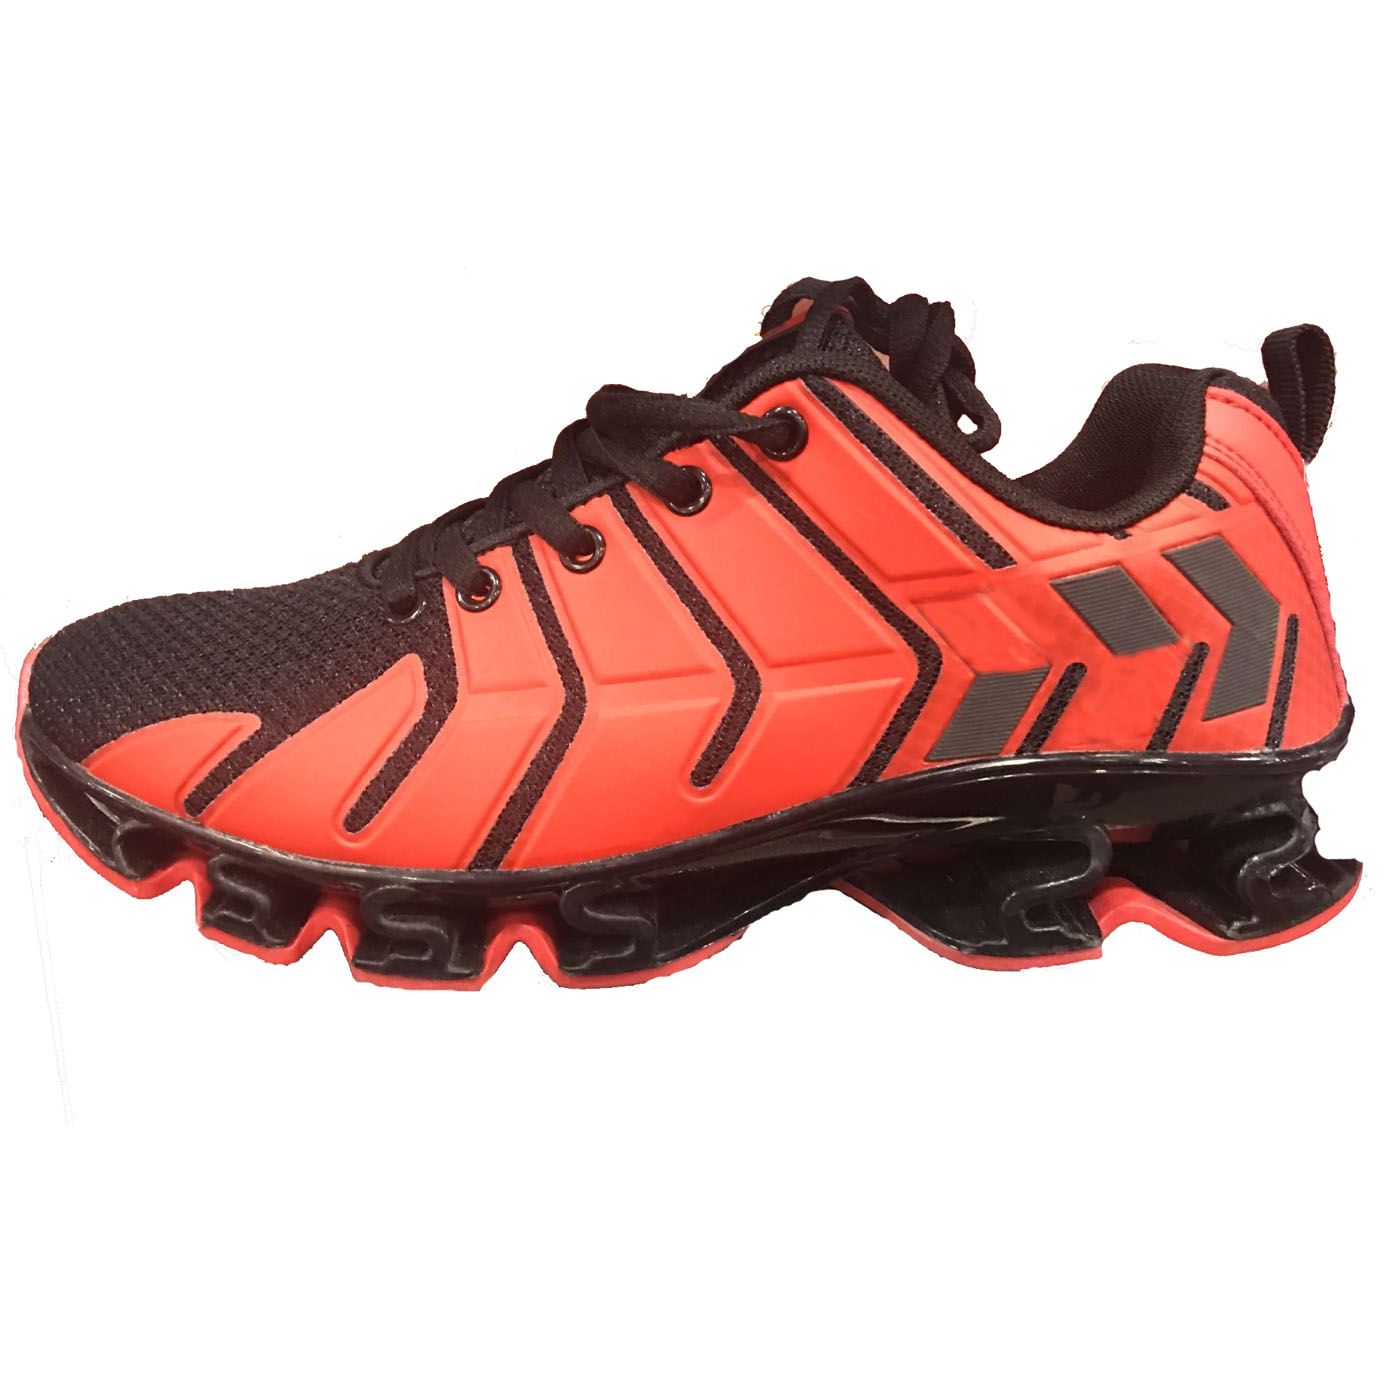 Sports Shoe Manufacturers in China